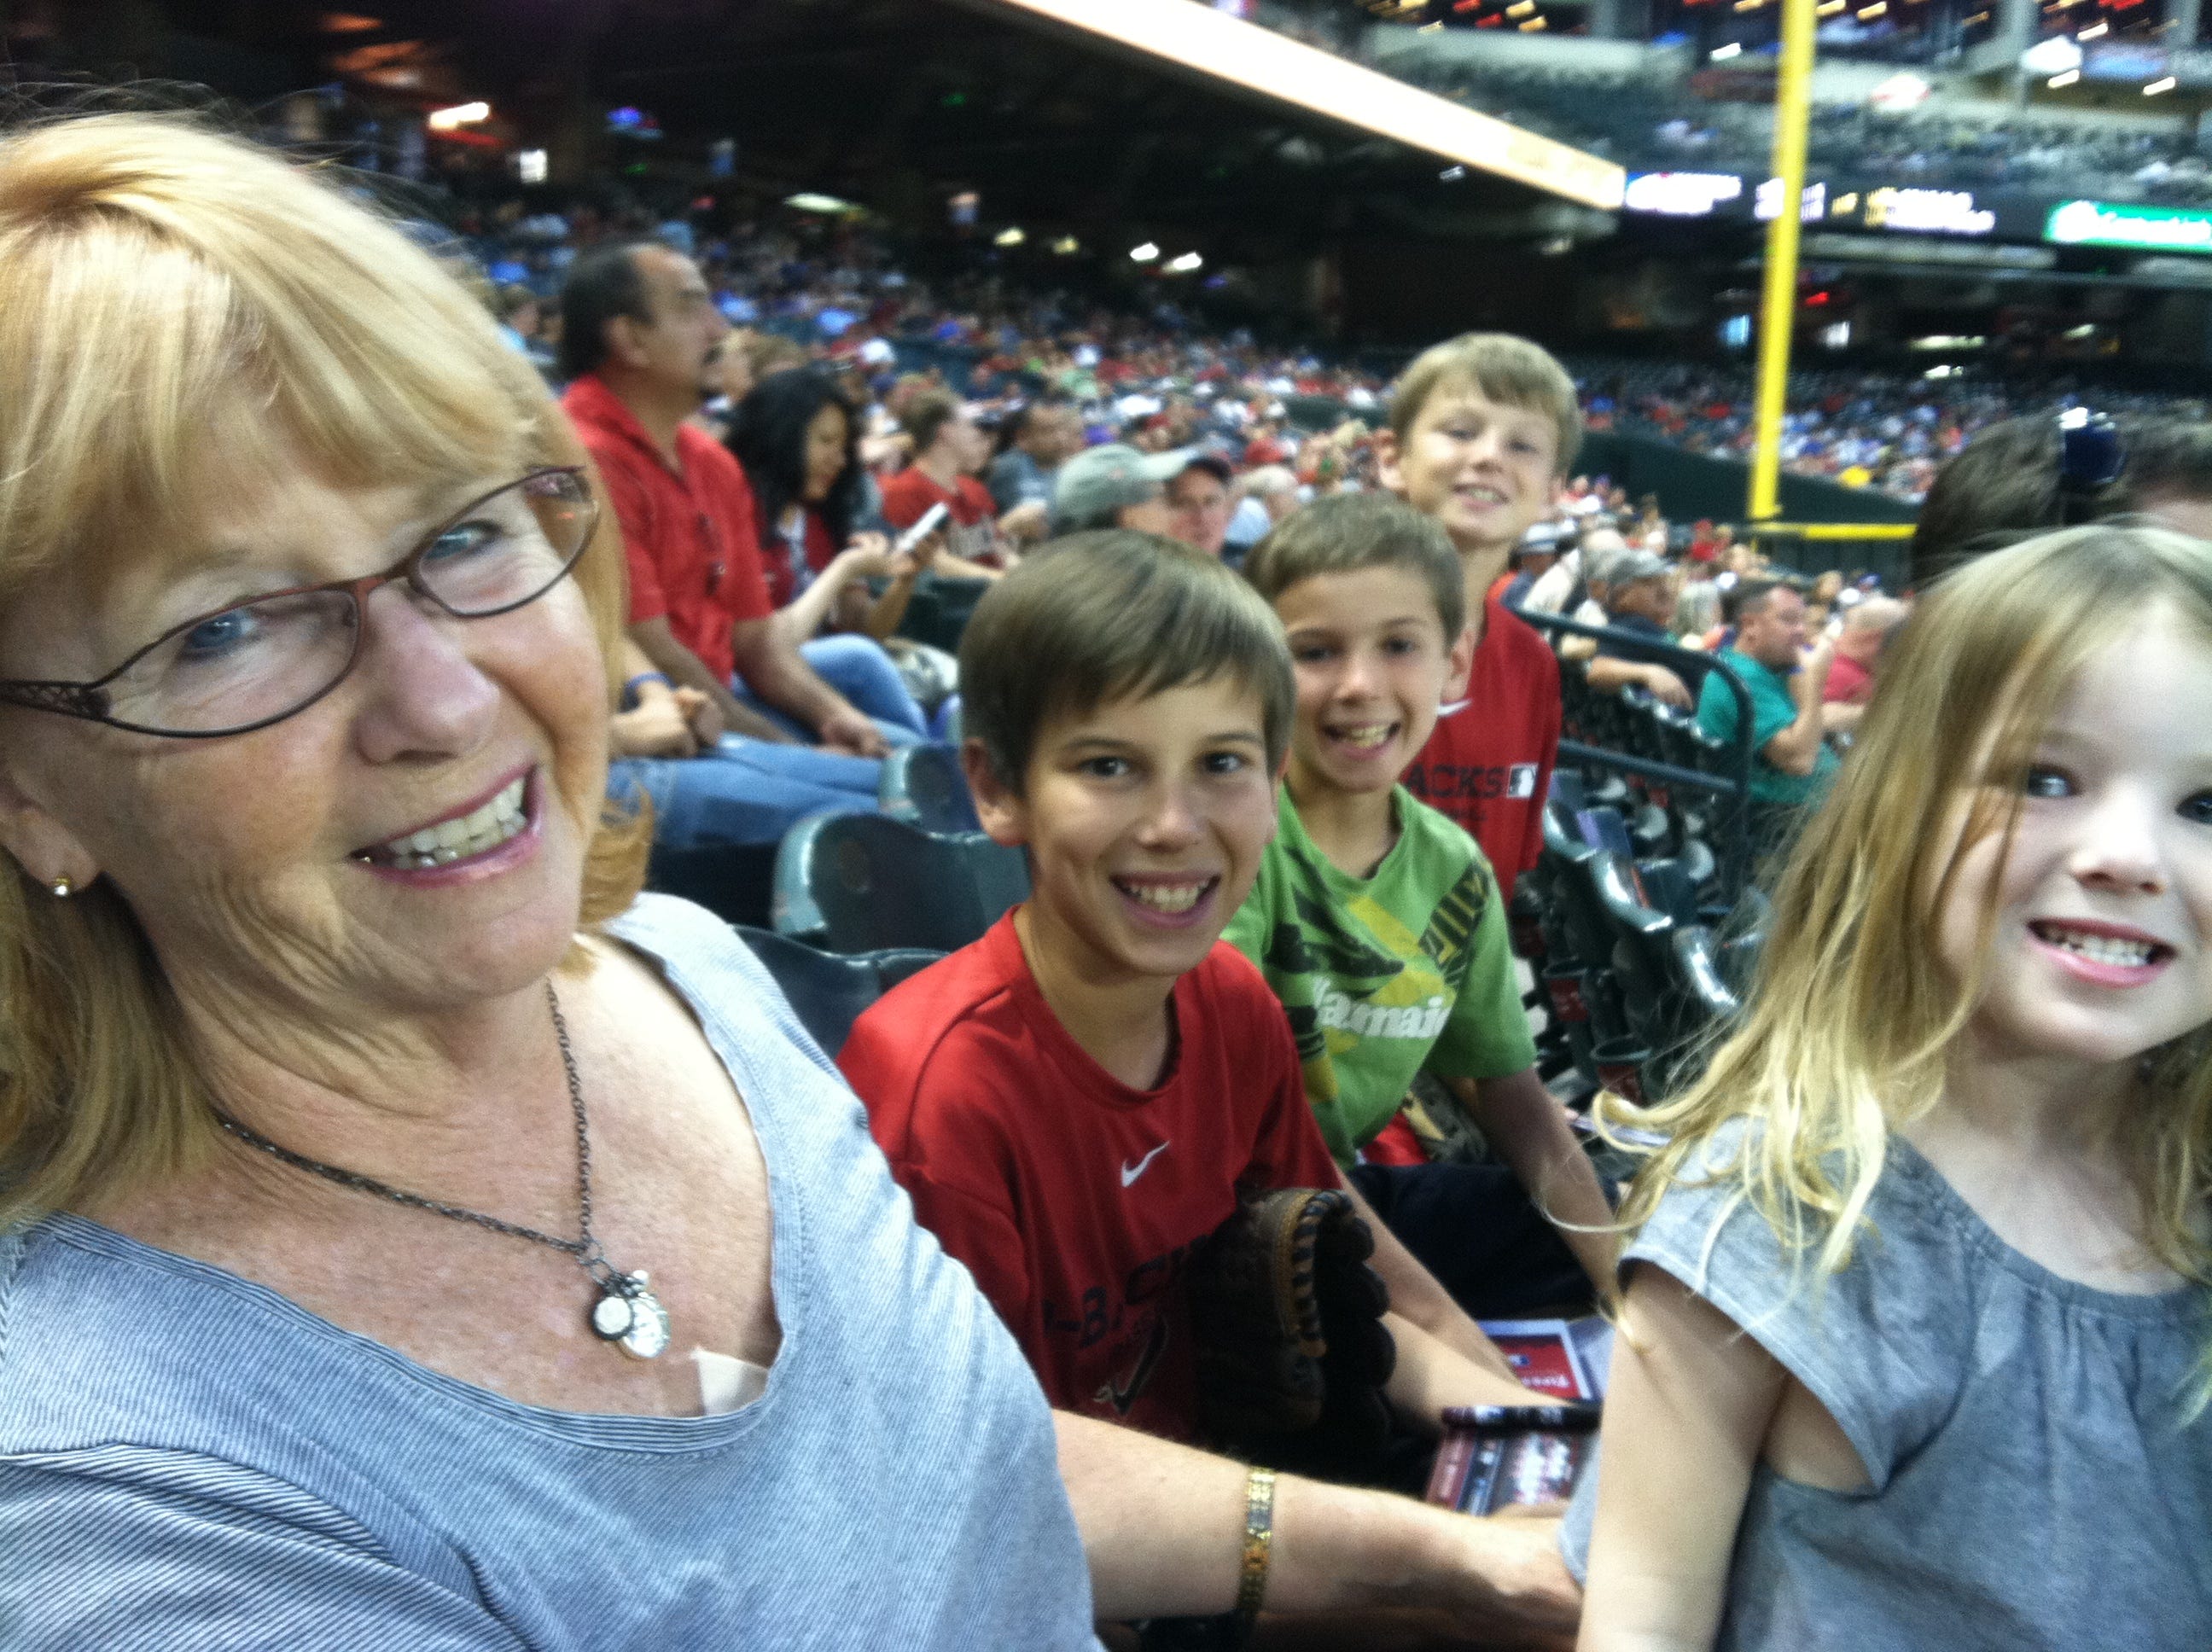 My mom would see my kids several times a week, dropping by to play a game or read a book. She took them to a few Diamondbacks baseball games the last summer we lived in Phoenix.